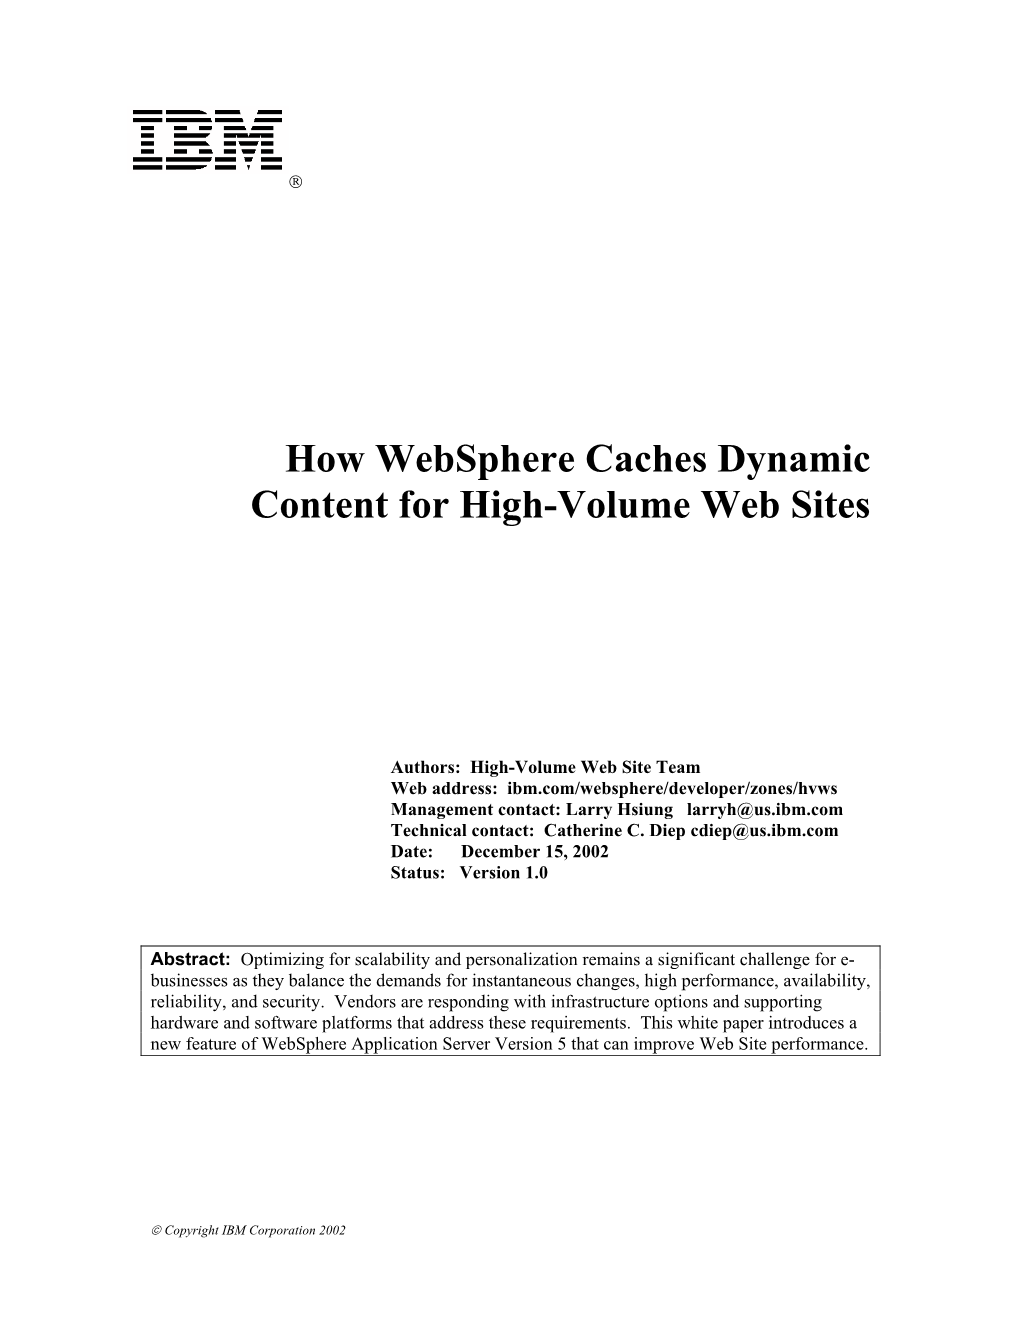 How Websphere Caches Dynamic Content for High-Volume Web Sites